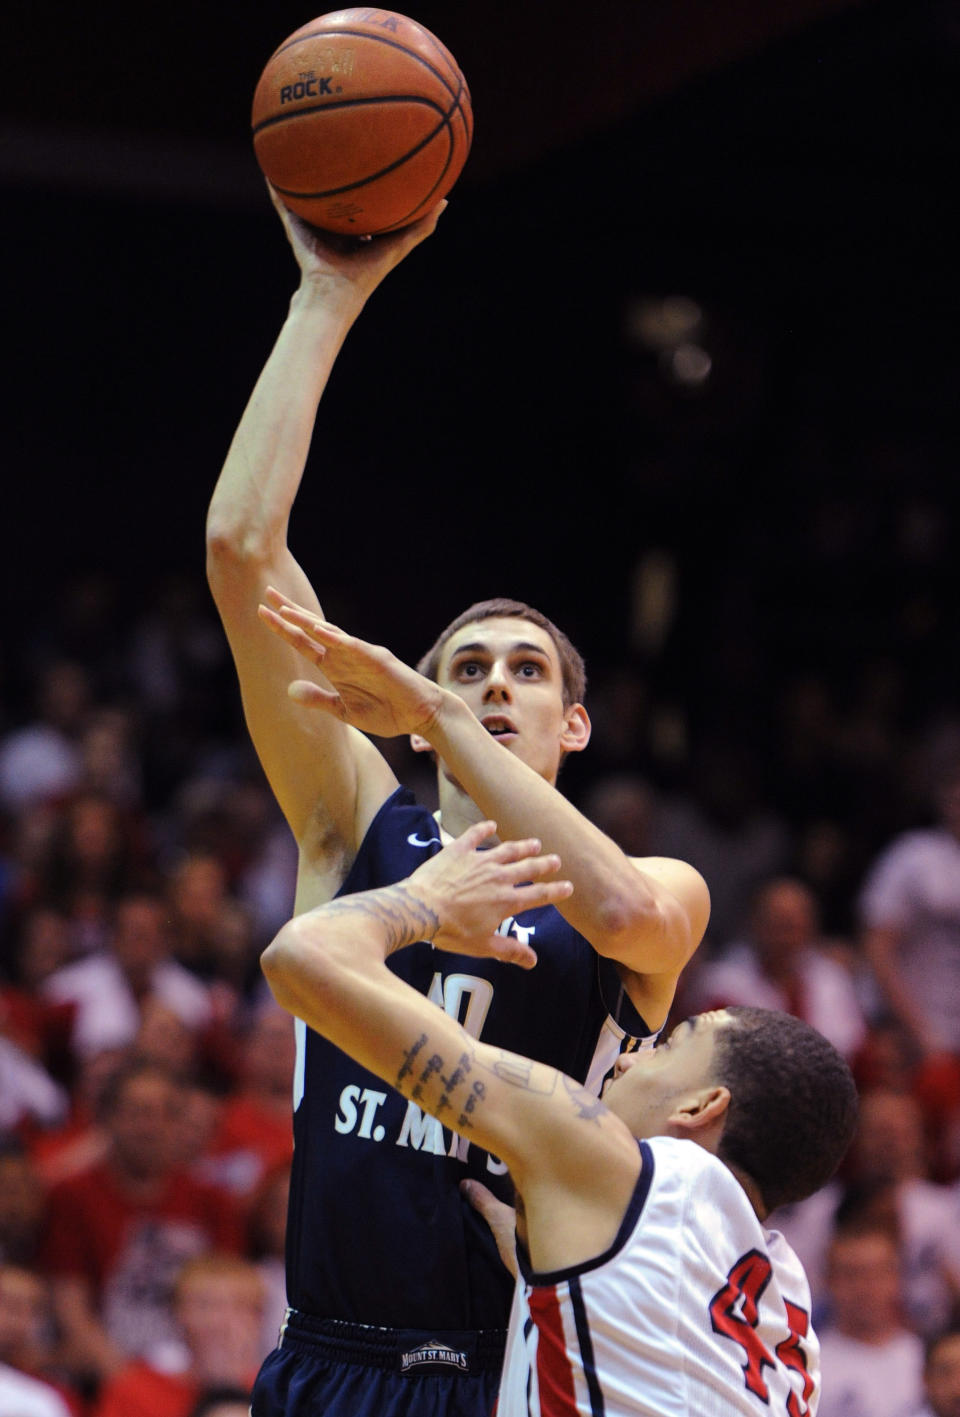 Mount St. Mary's' Taylor Danaher shoots over Robert Morris' Stephan Hawkins (45) during the first half of the Northeastern Conference championship NCAA college basketball game on Tuesday, March 11, 2014, in Coraopolis, Pa. (AP Photo/Don Wright)